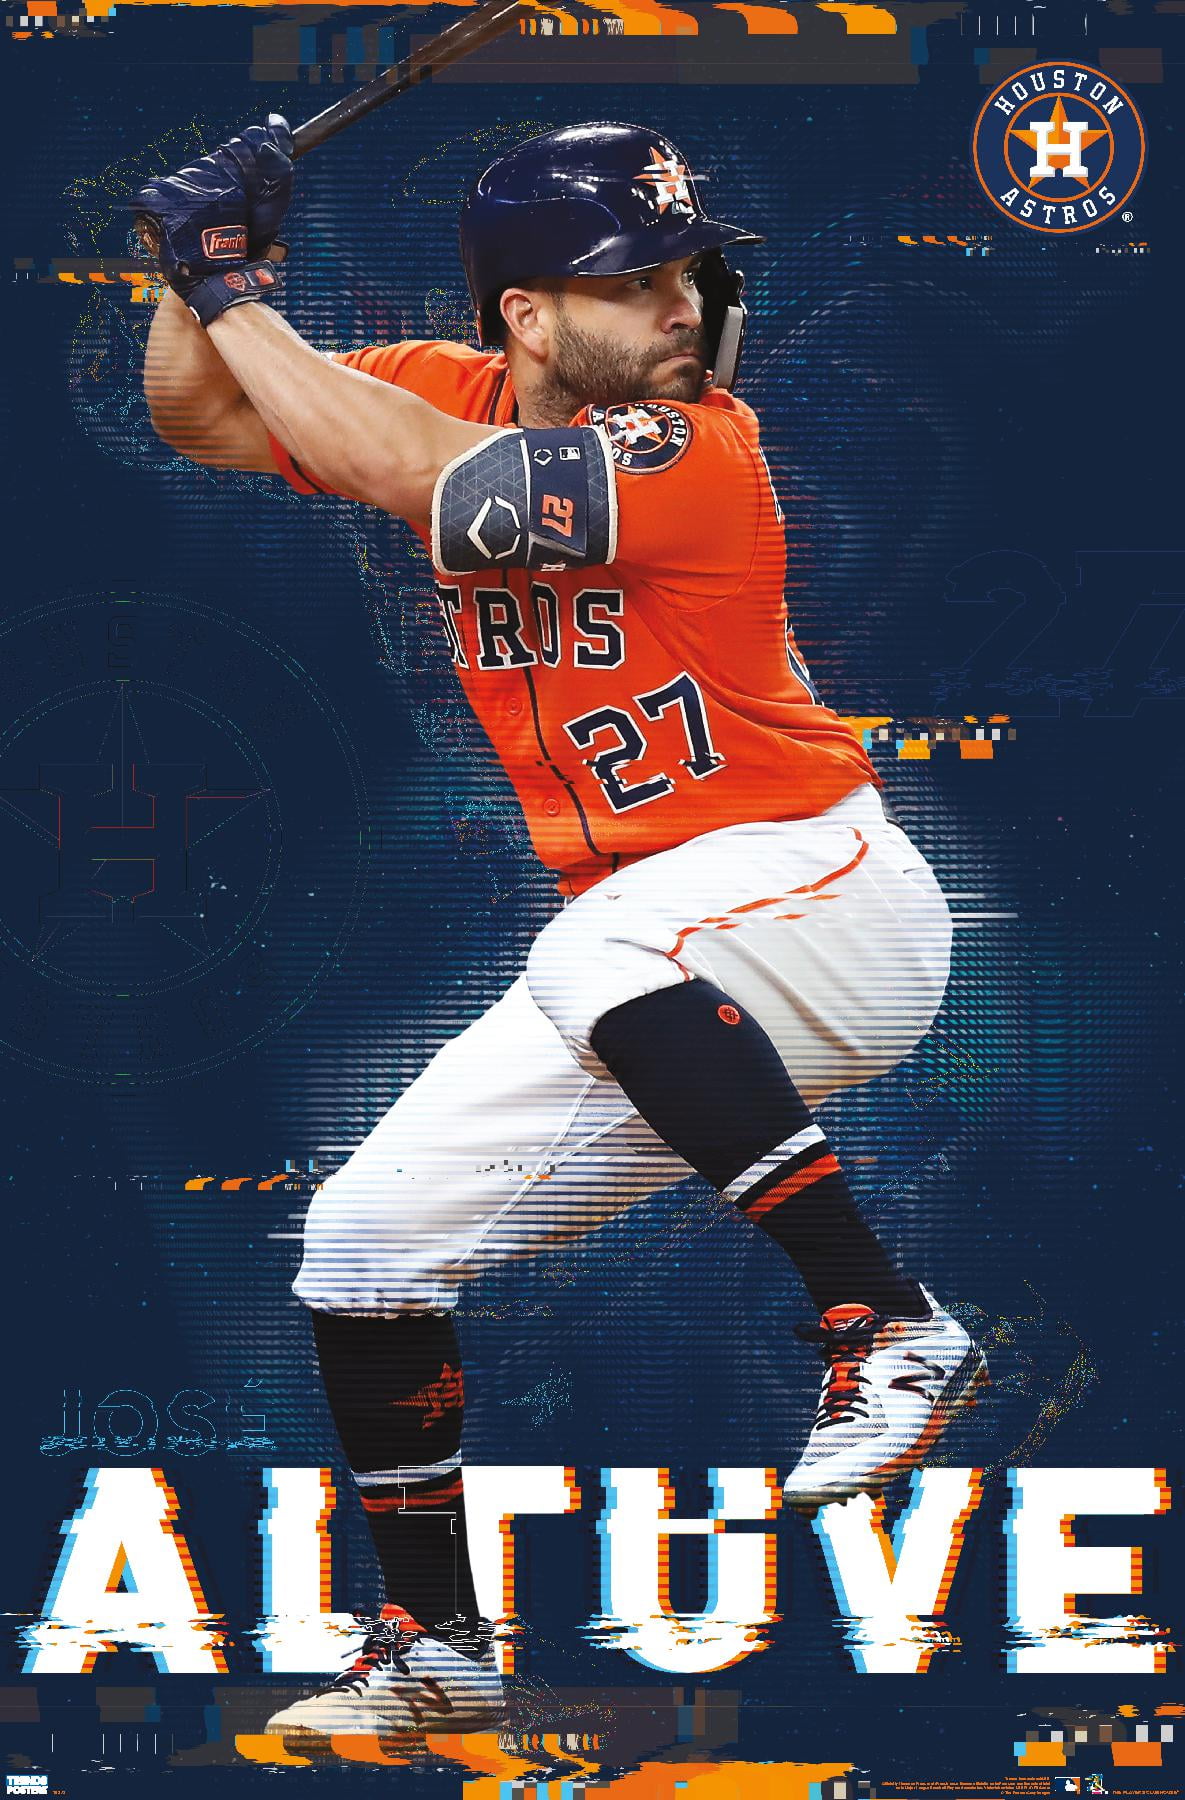 Should be on the cover of mlbtheshow18  Houston astros baseball Baseball  wallpaper José altuve